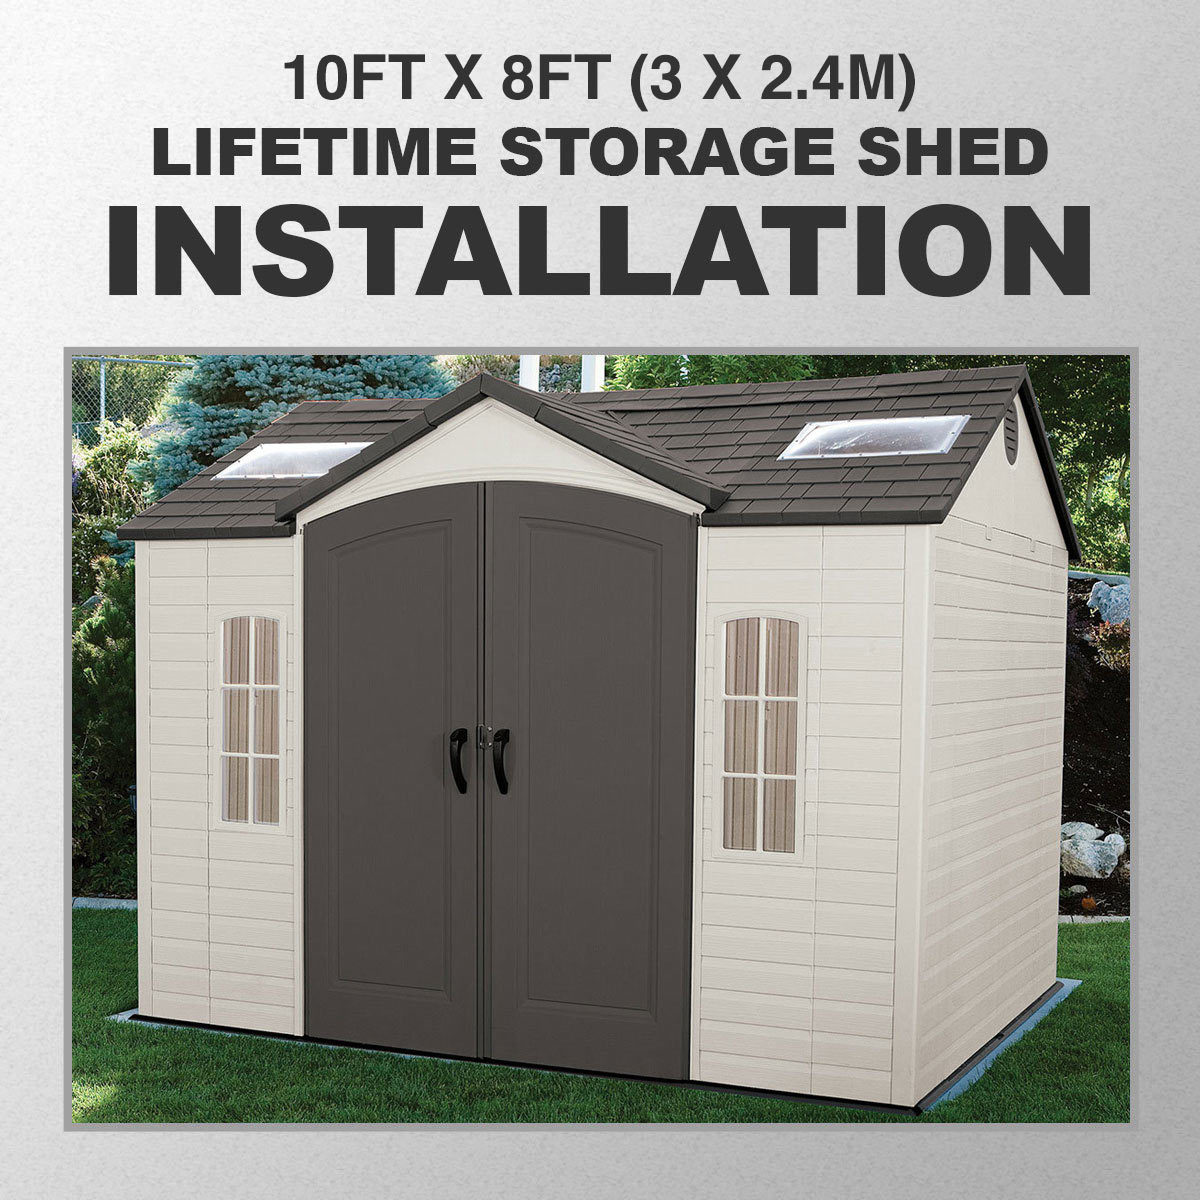 Installation for Lifetime 10ft x 8ft (3 x 2.4m) Storage Shed